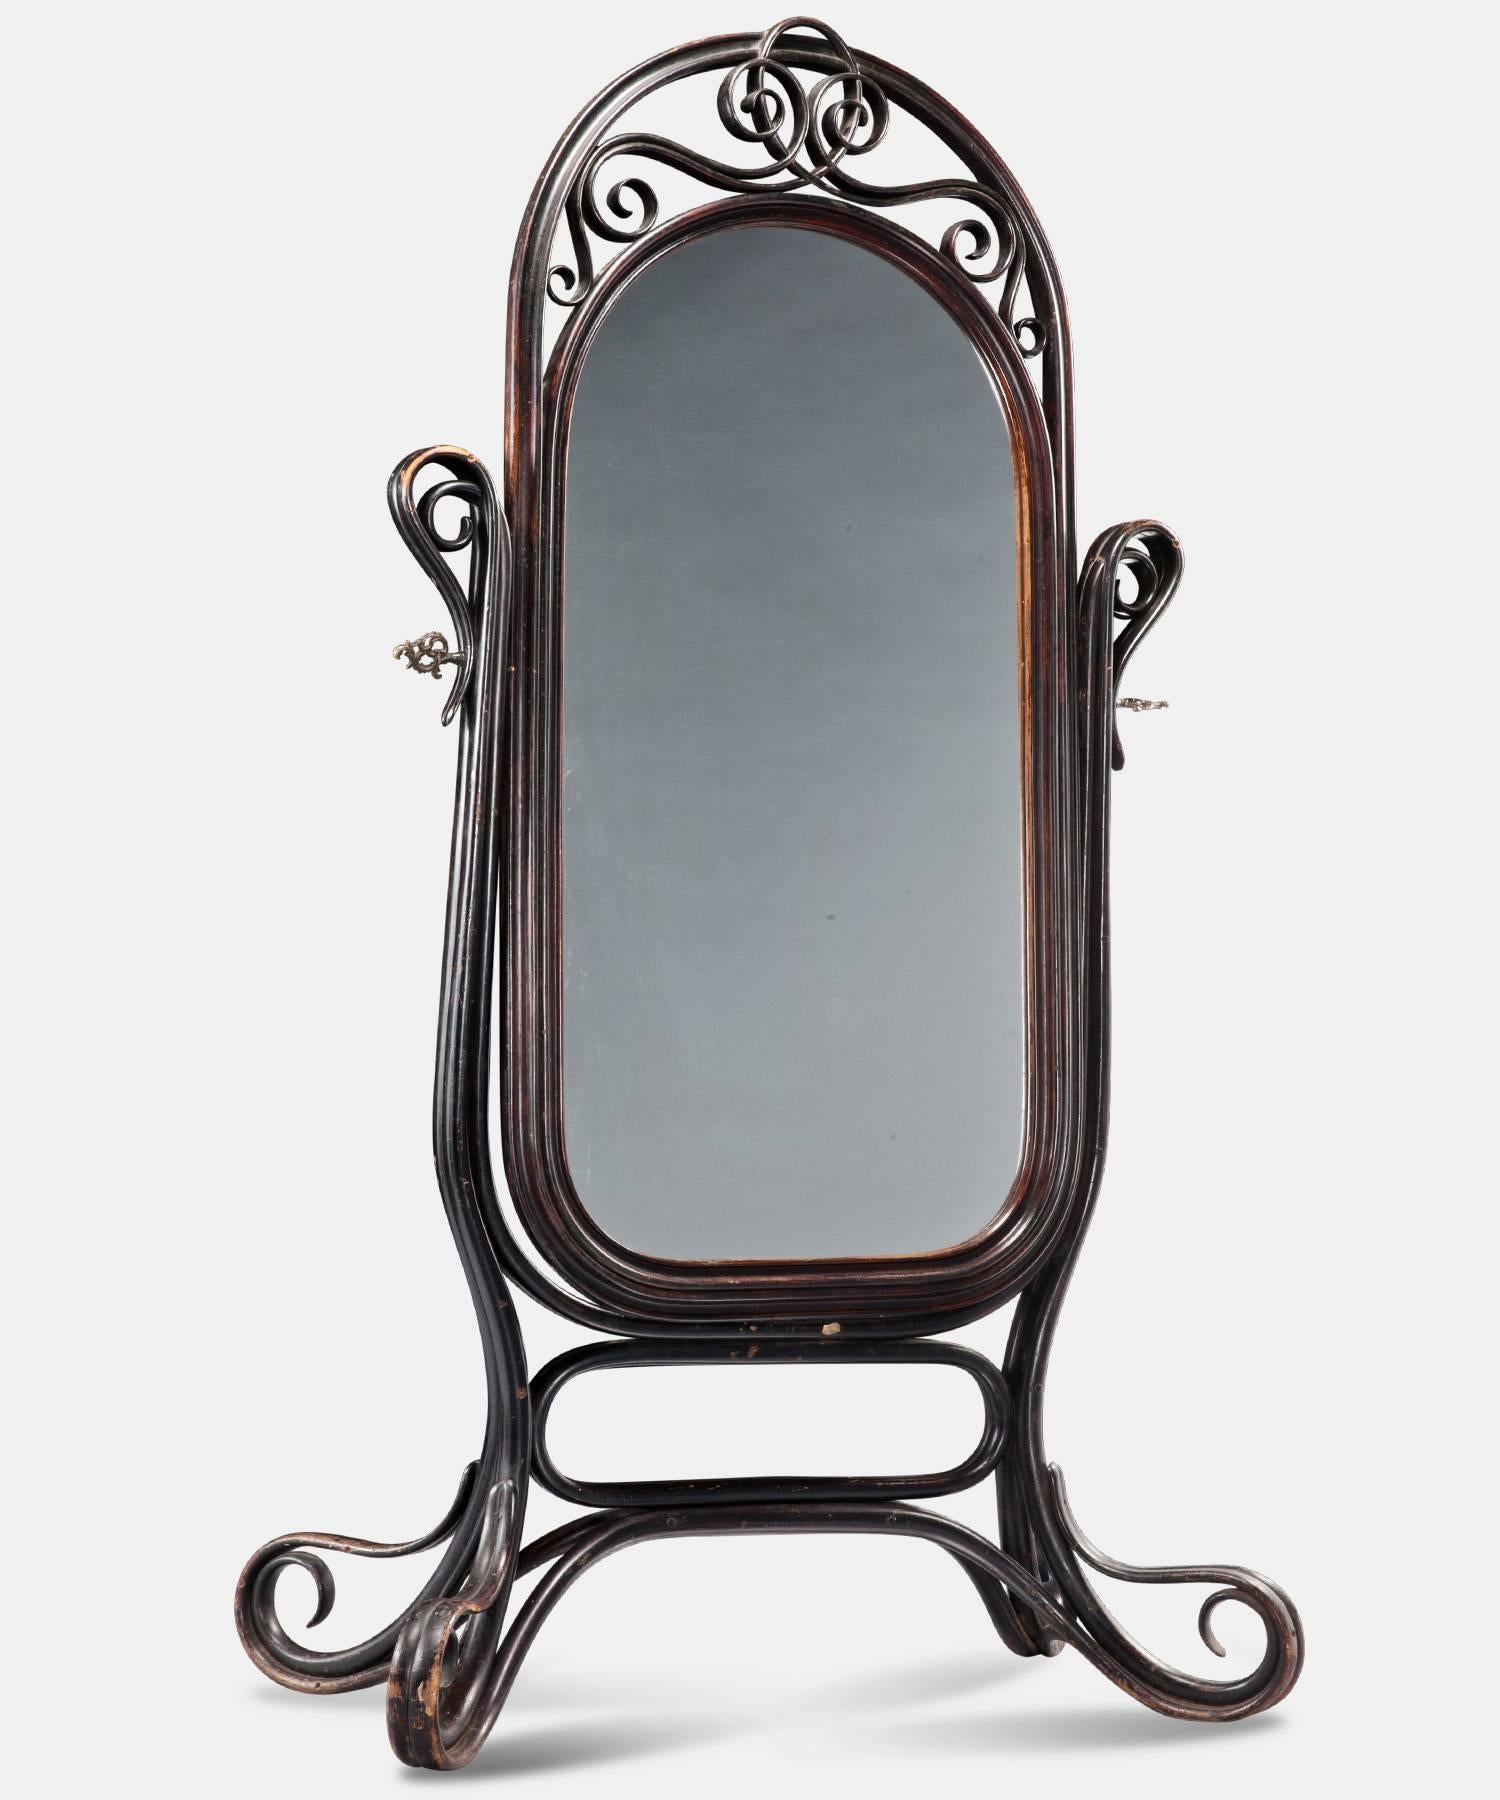 Floor mirror with bentwood frame and beveled glass.